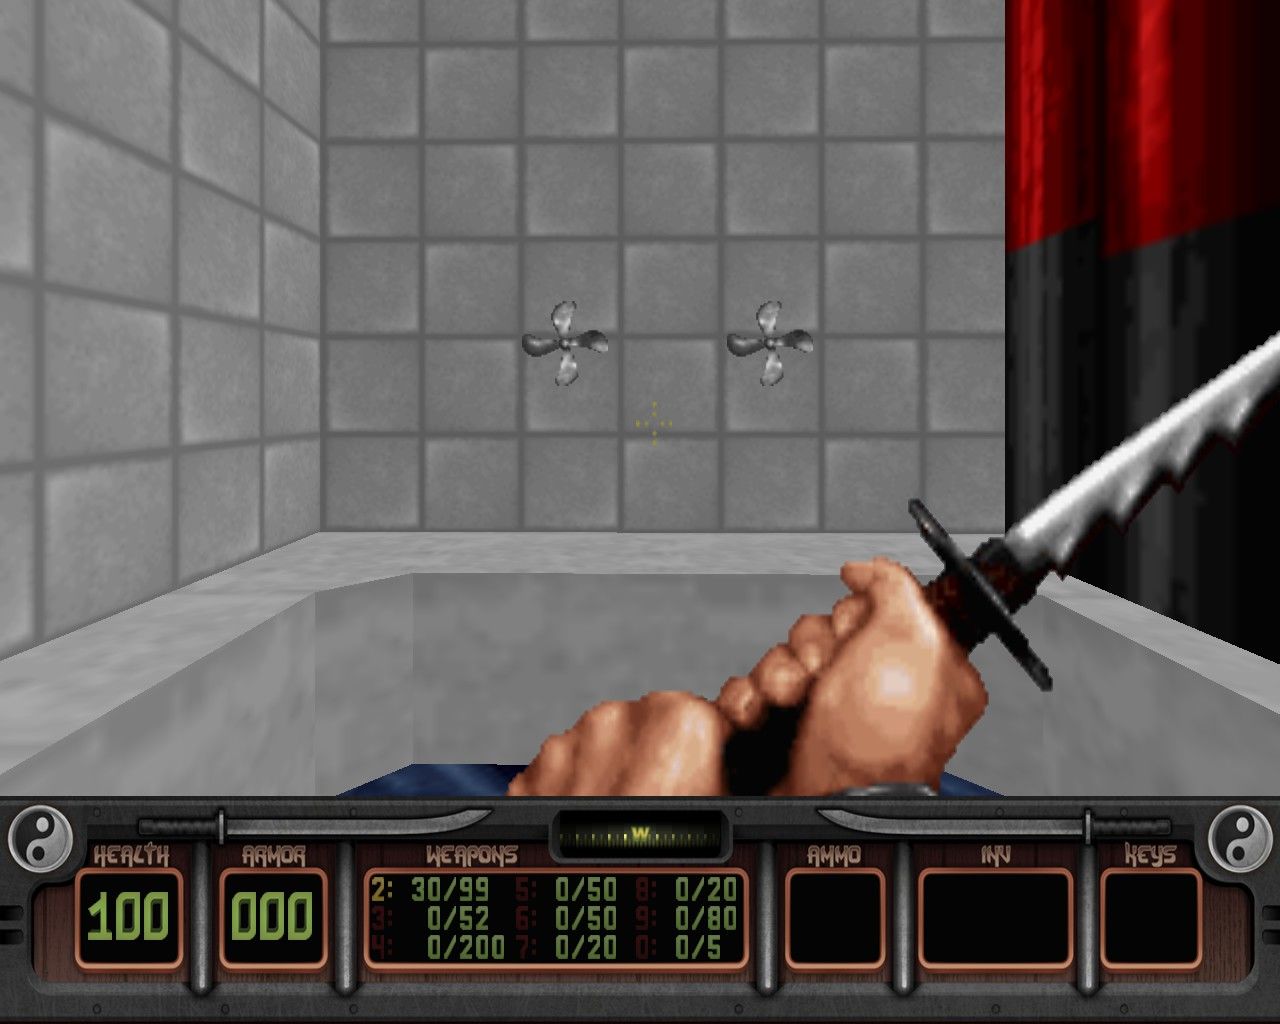 Shadow Warrior Classic Redux Preview - This Classic 3D Realms